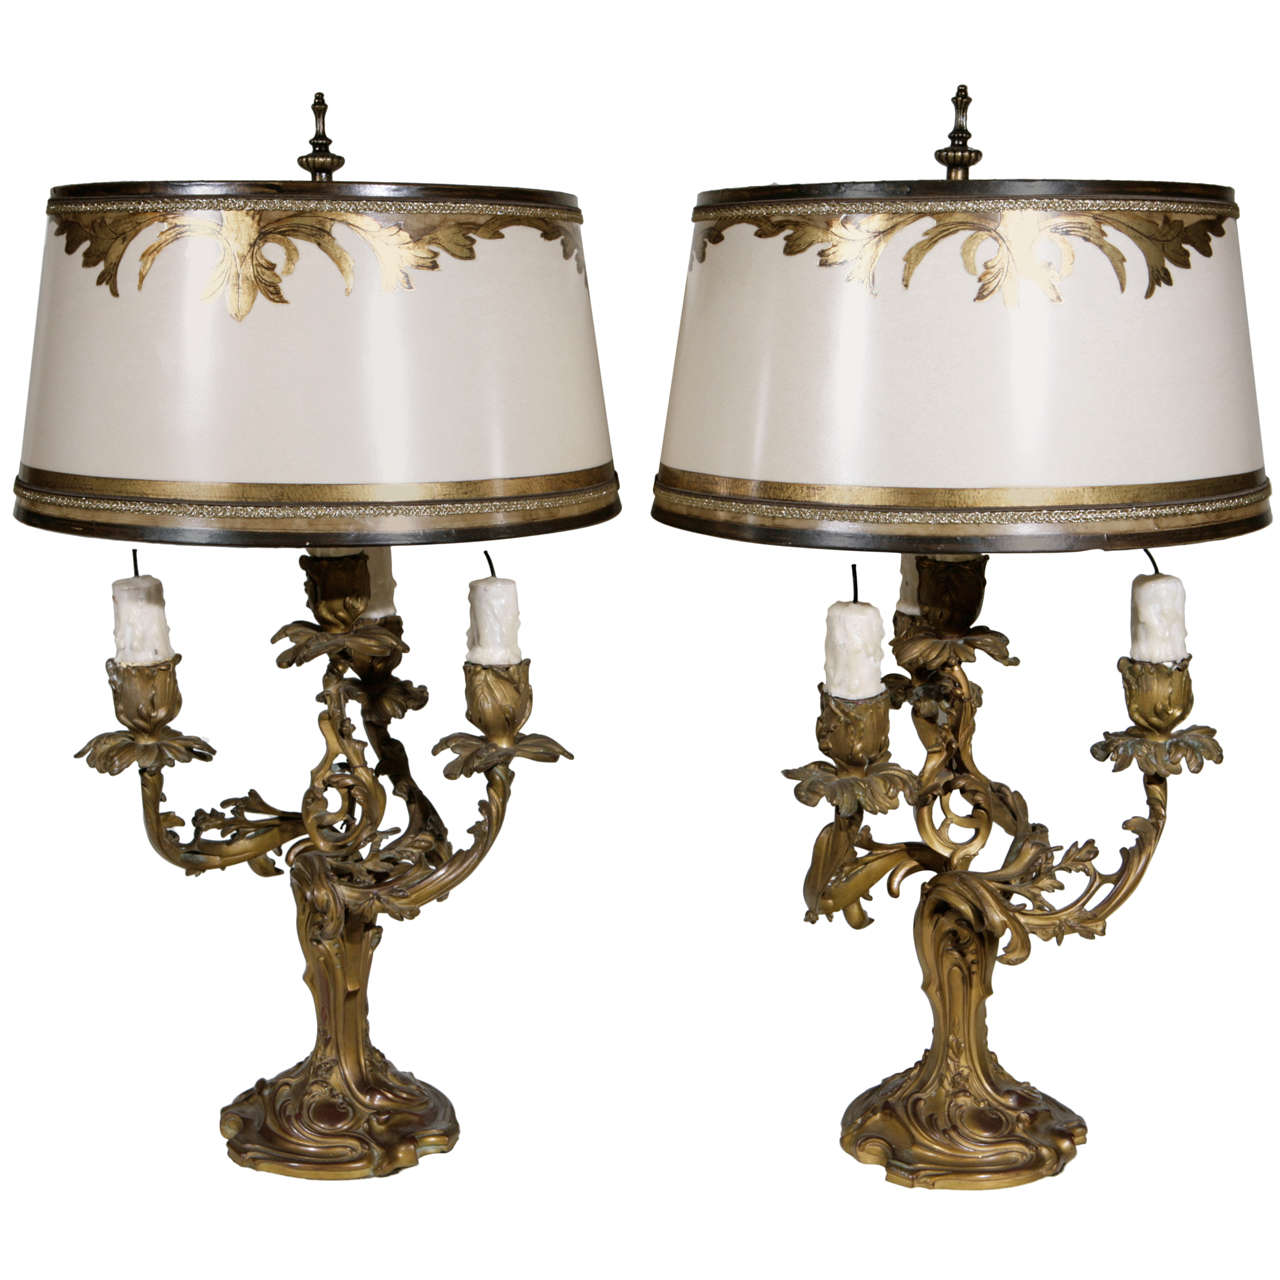 Pair of 19th c. French 3 Arm Dore Bronze Candelabra Lamps